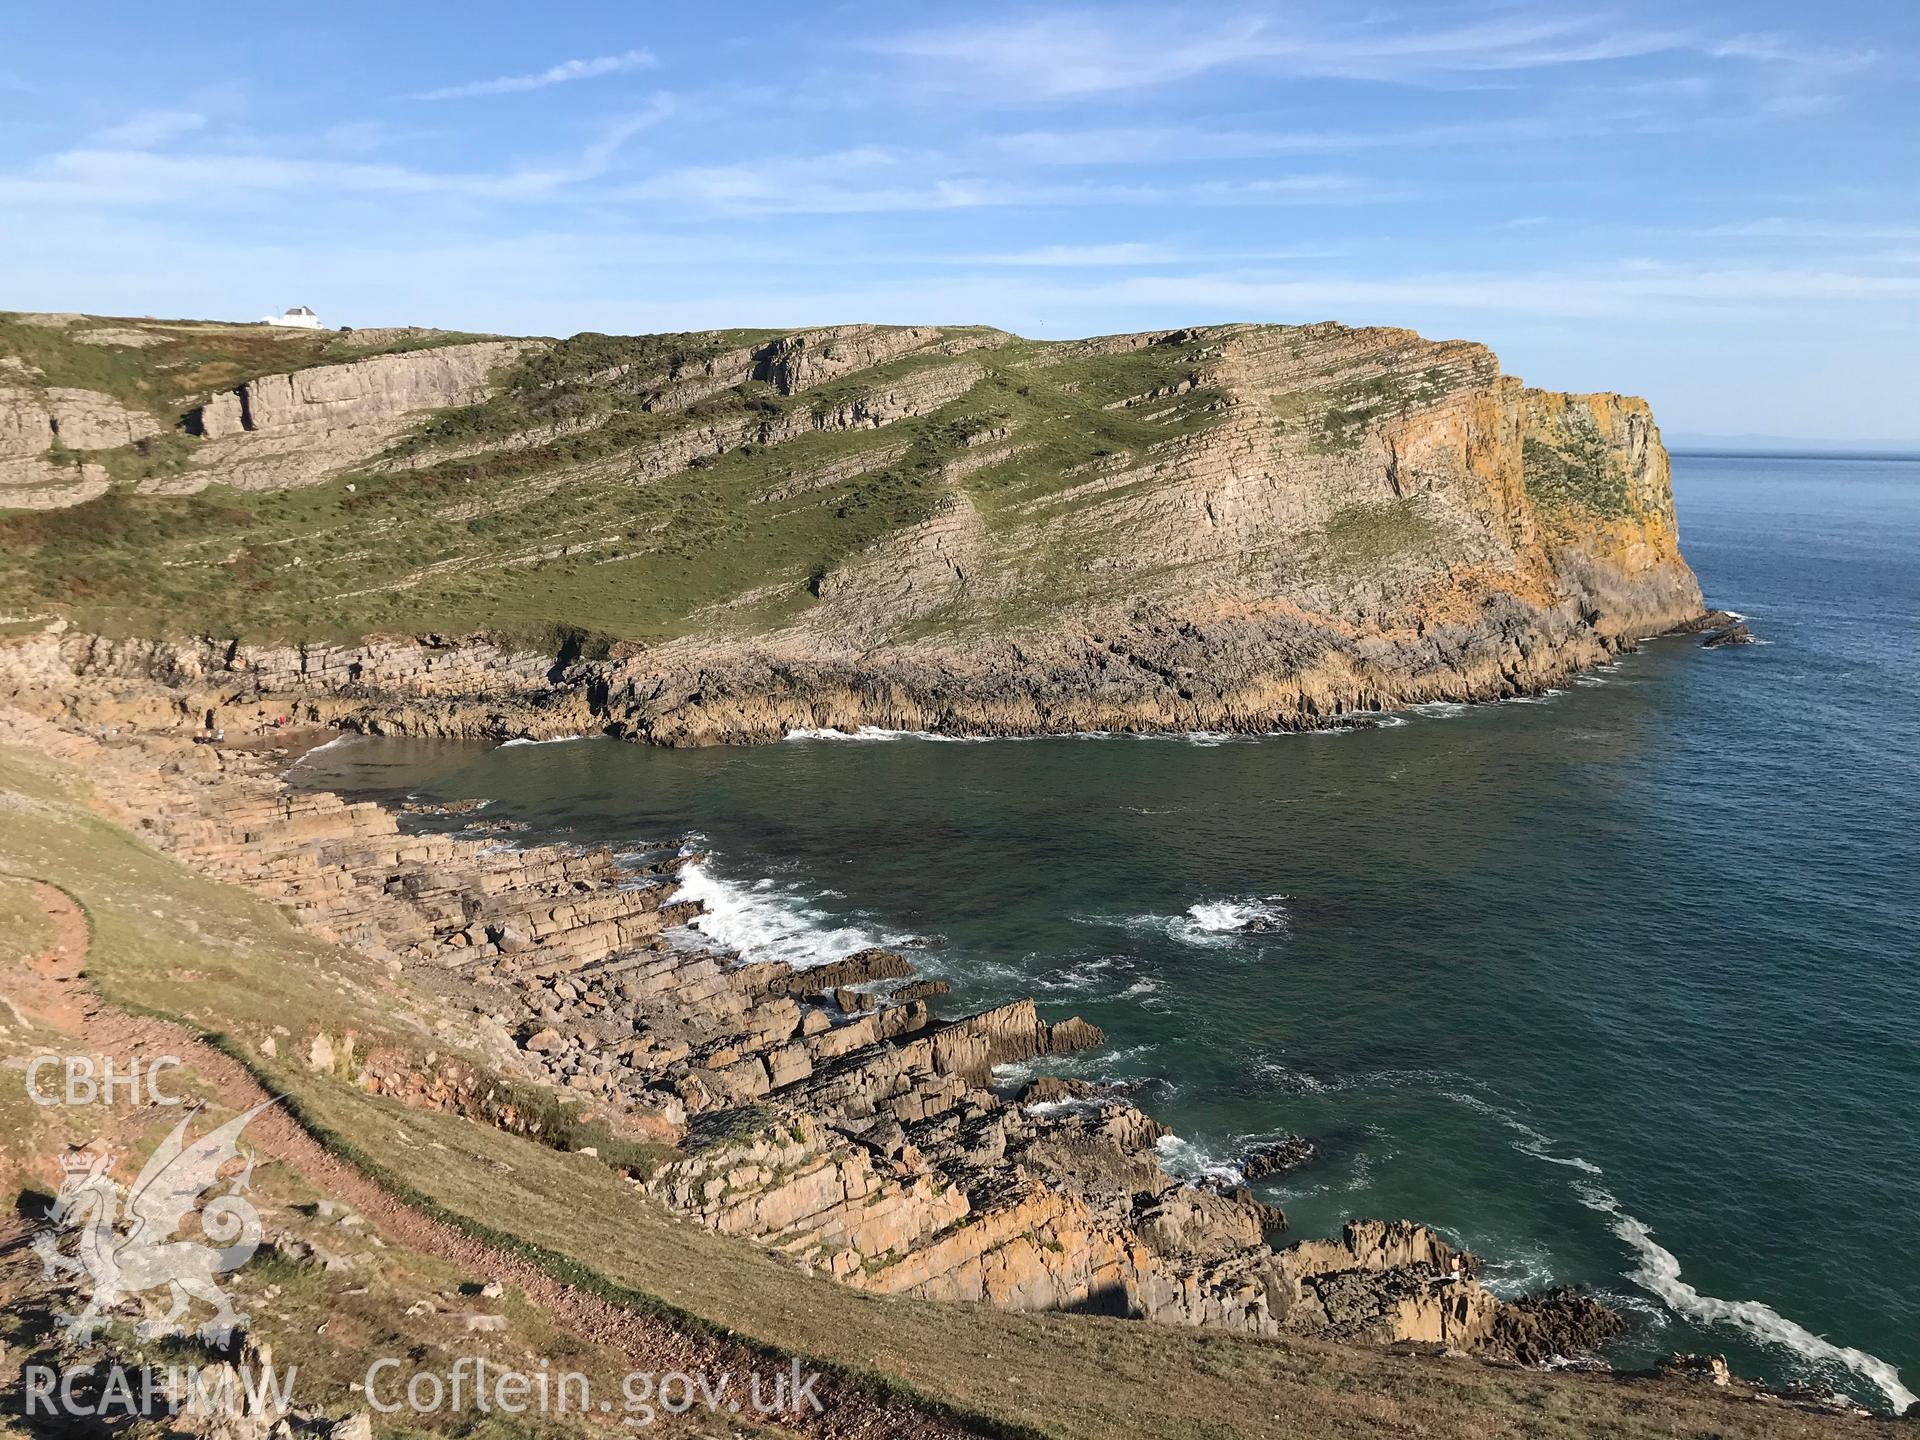 Digital colour photograph showing Thurba Camp promontory fort, Rhossili, taken by Paul R. Davis on 14th September 2019.